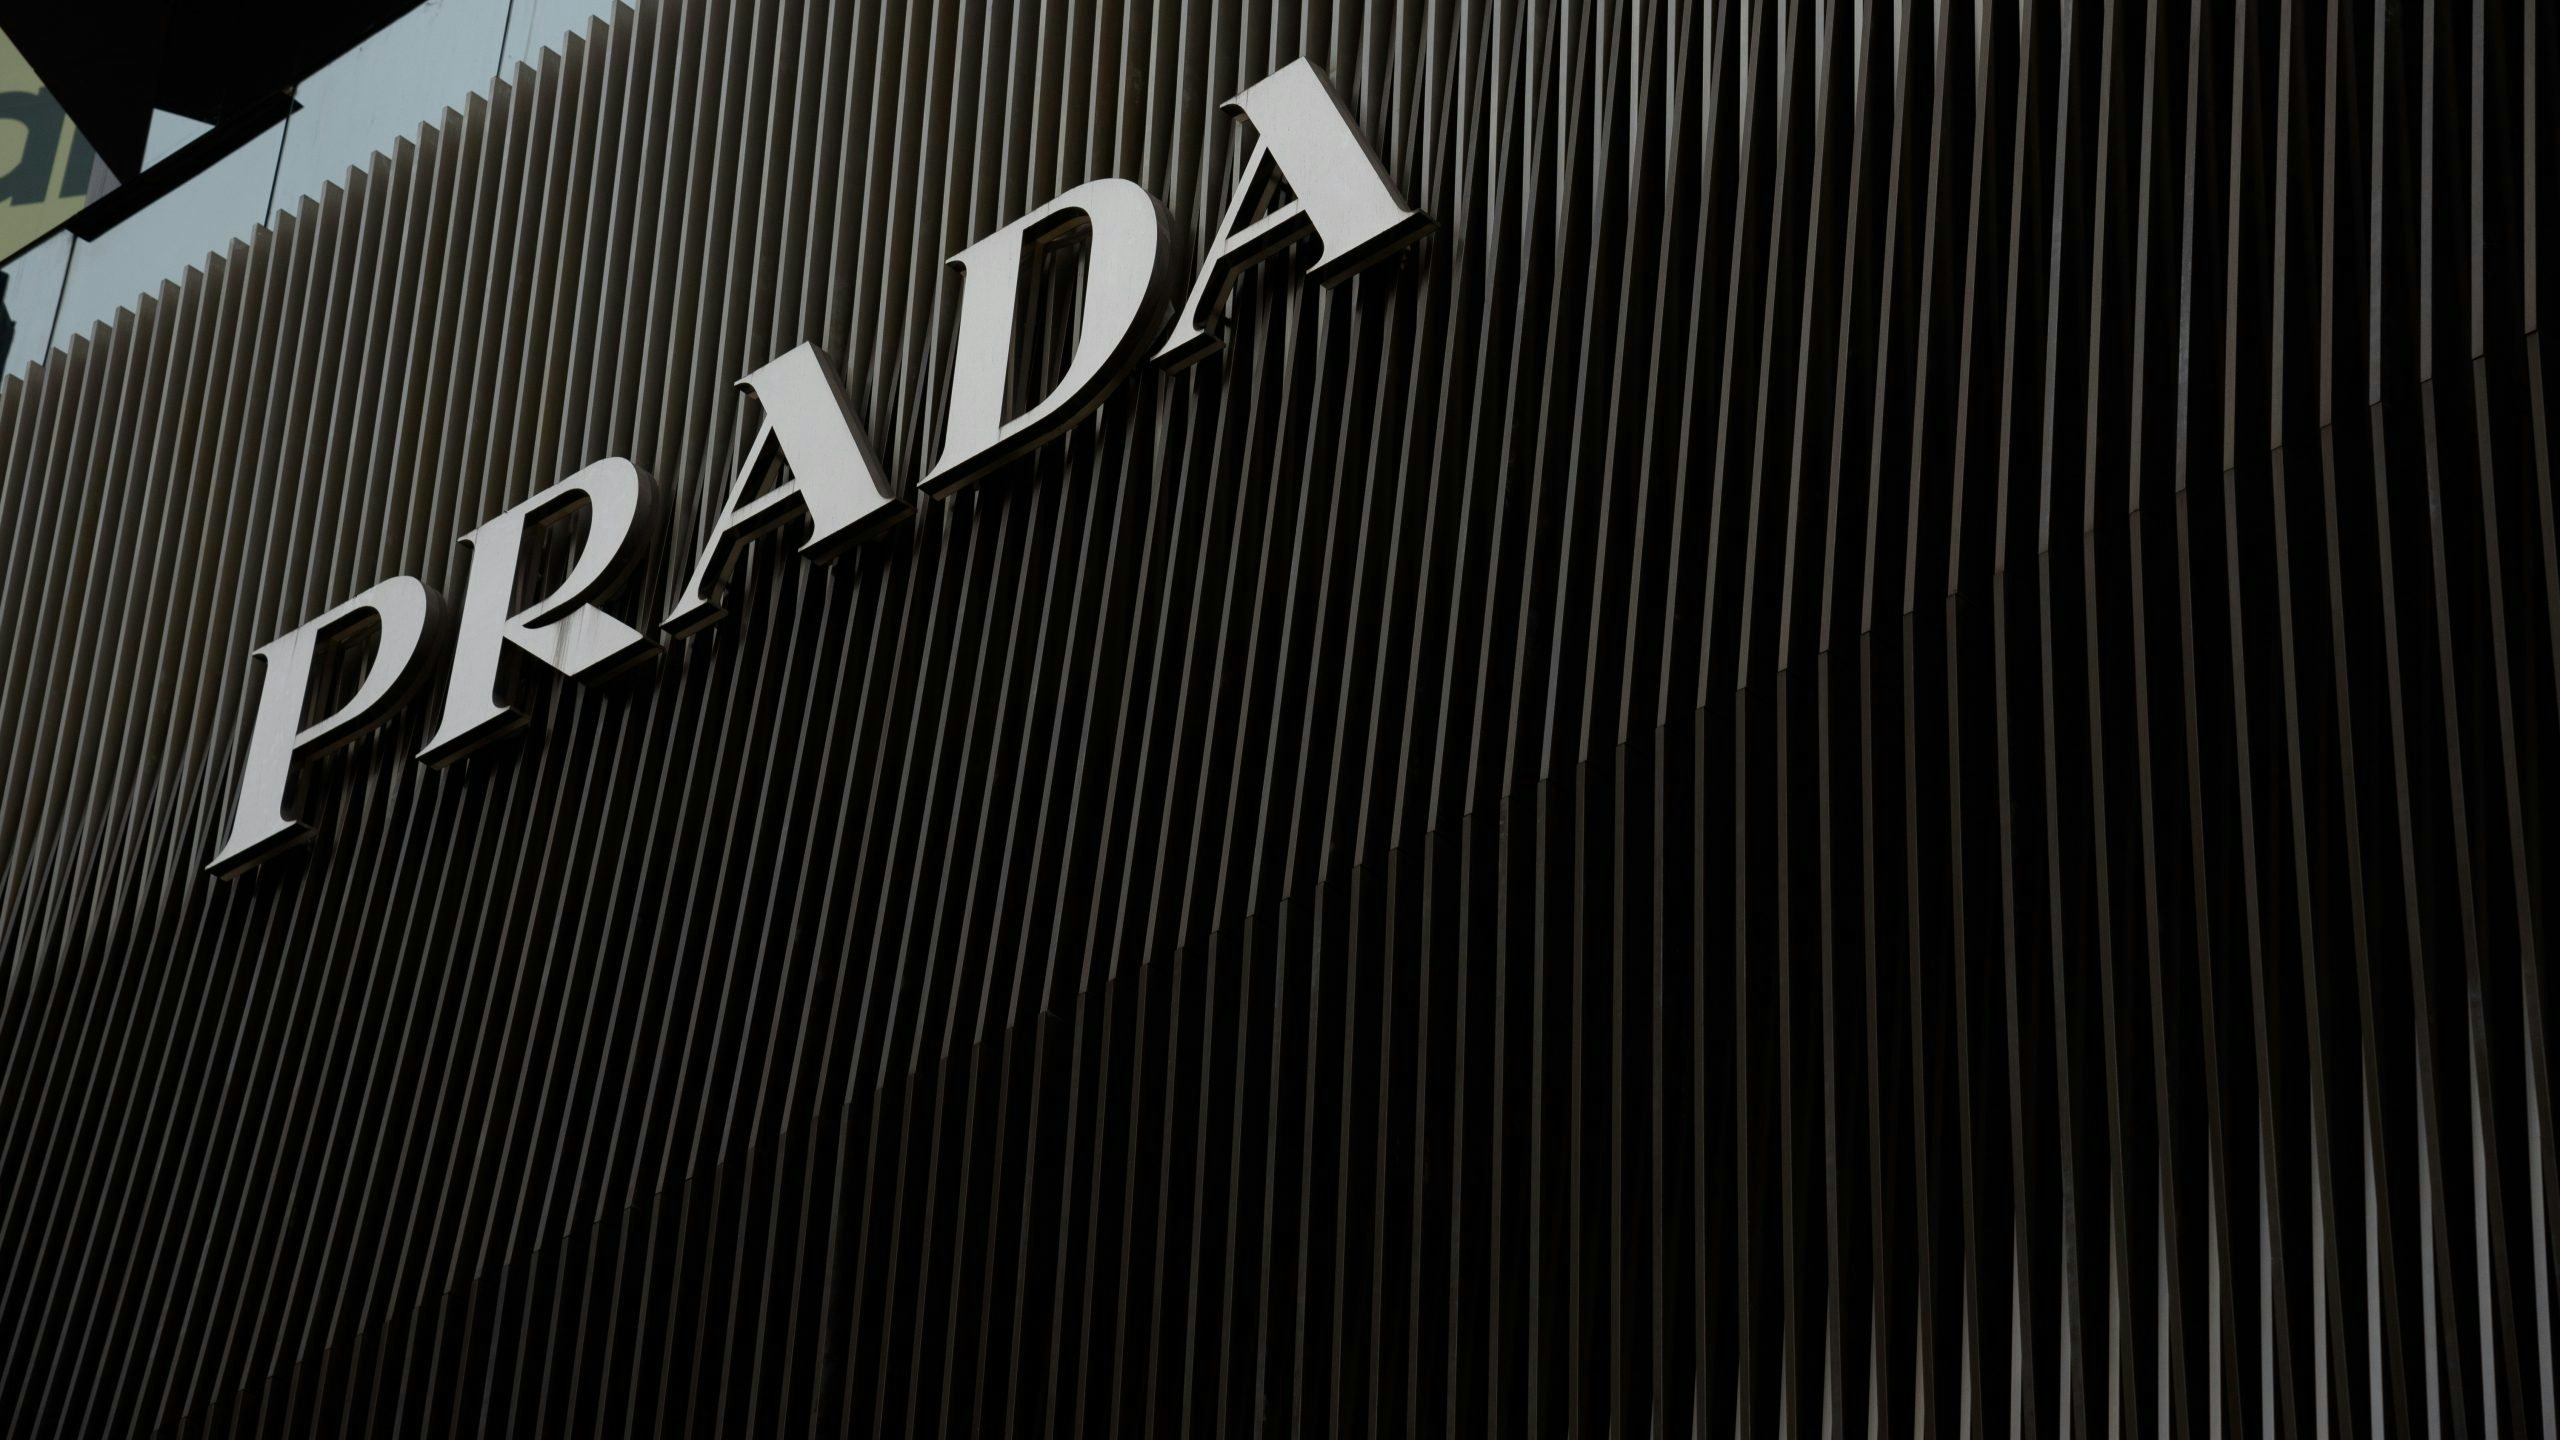 Prada reports APAC growth took a hit due to Hong Kong protests in FY 2019, but mainland China remained strong. Photo: Shutterstock